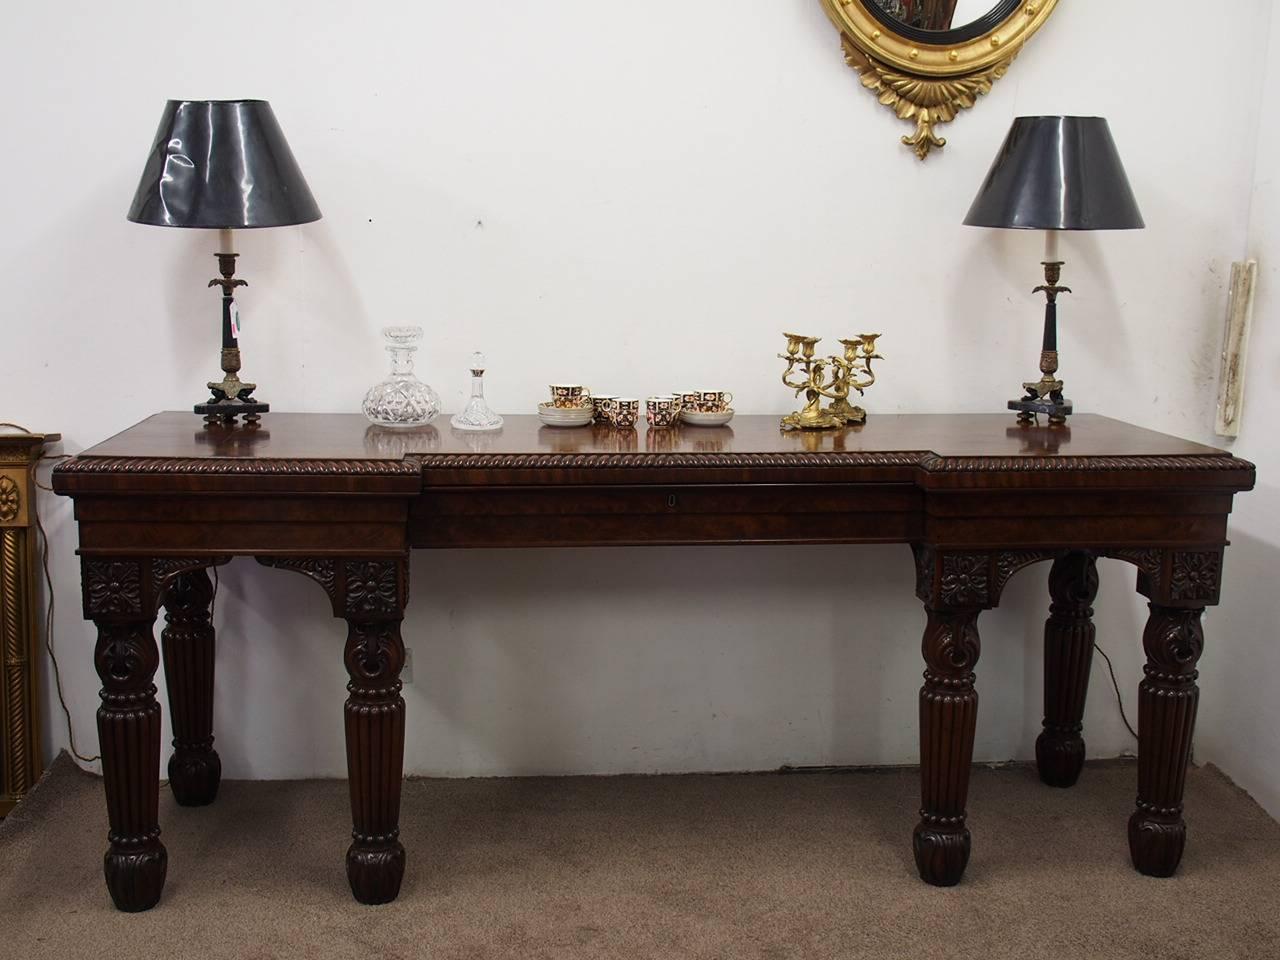 Regency Mahogany Breakfront Hall Table or Serving Table, circa 1820 In Good Condition For Sale In Edinburgh, GB